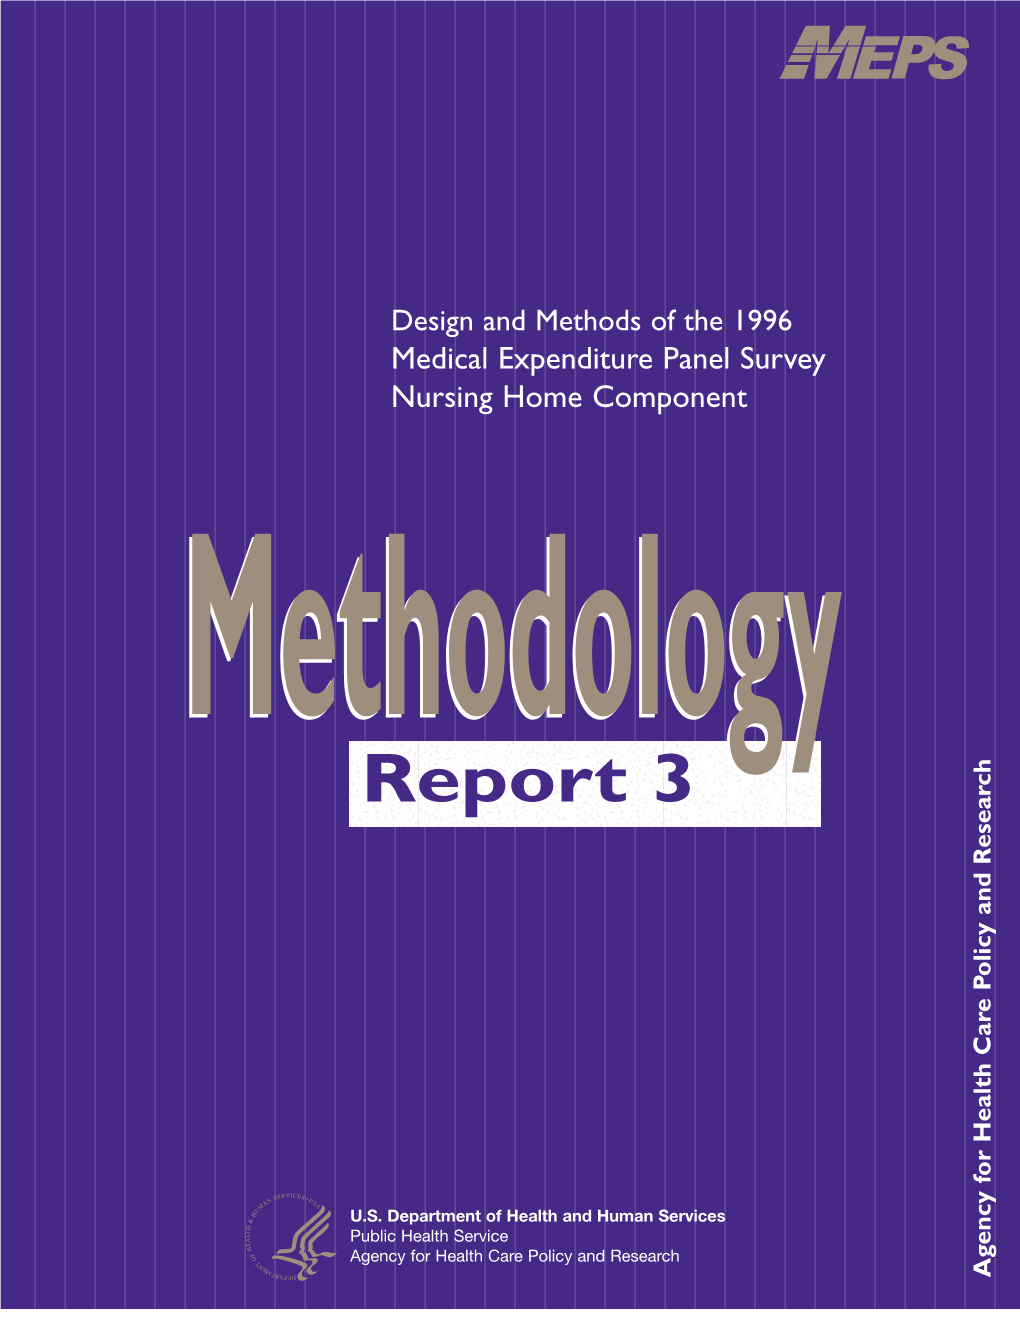 Design and Methods of the 1996 Medical Expenditure Panel Survey Nursing Home Component Methodolomethodologgyy Ch �����Yyyyyzzzzreport 3